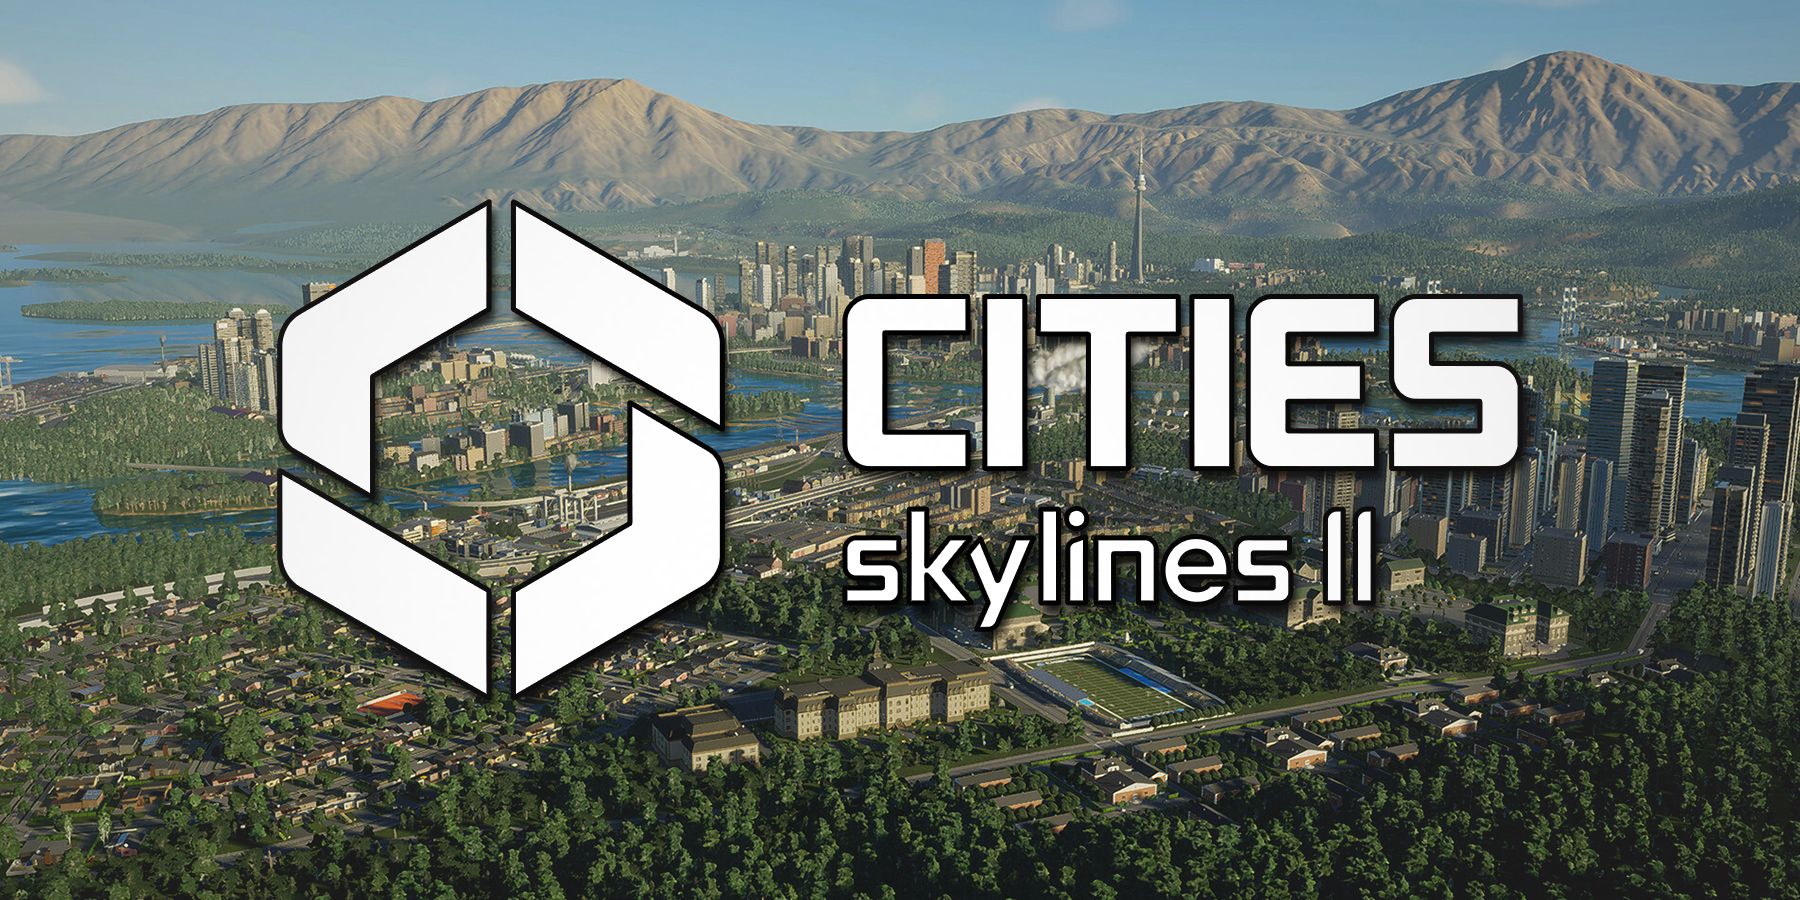 Cities: Skylines 2 won't be delayed despite performance glitches